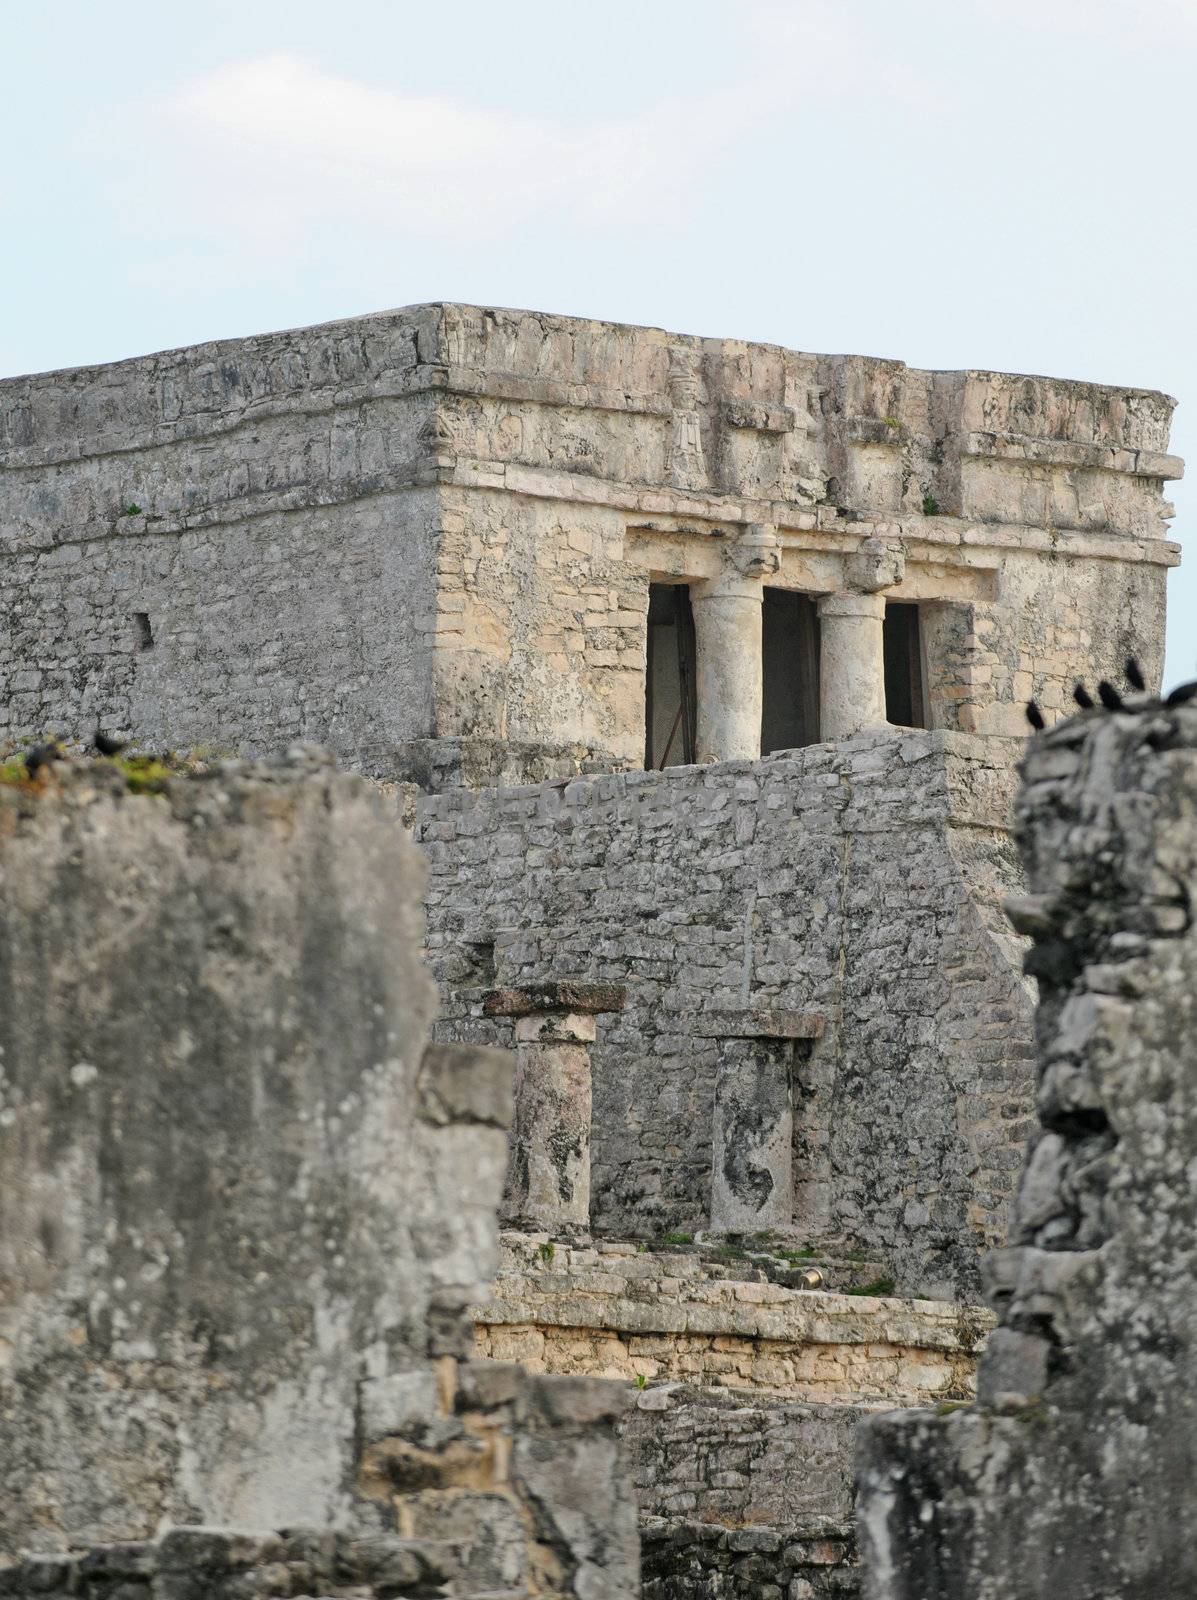 Ancient Mayan Ruins and Ceremonial Temple in Tulum, Mexico